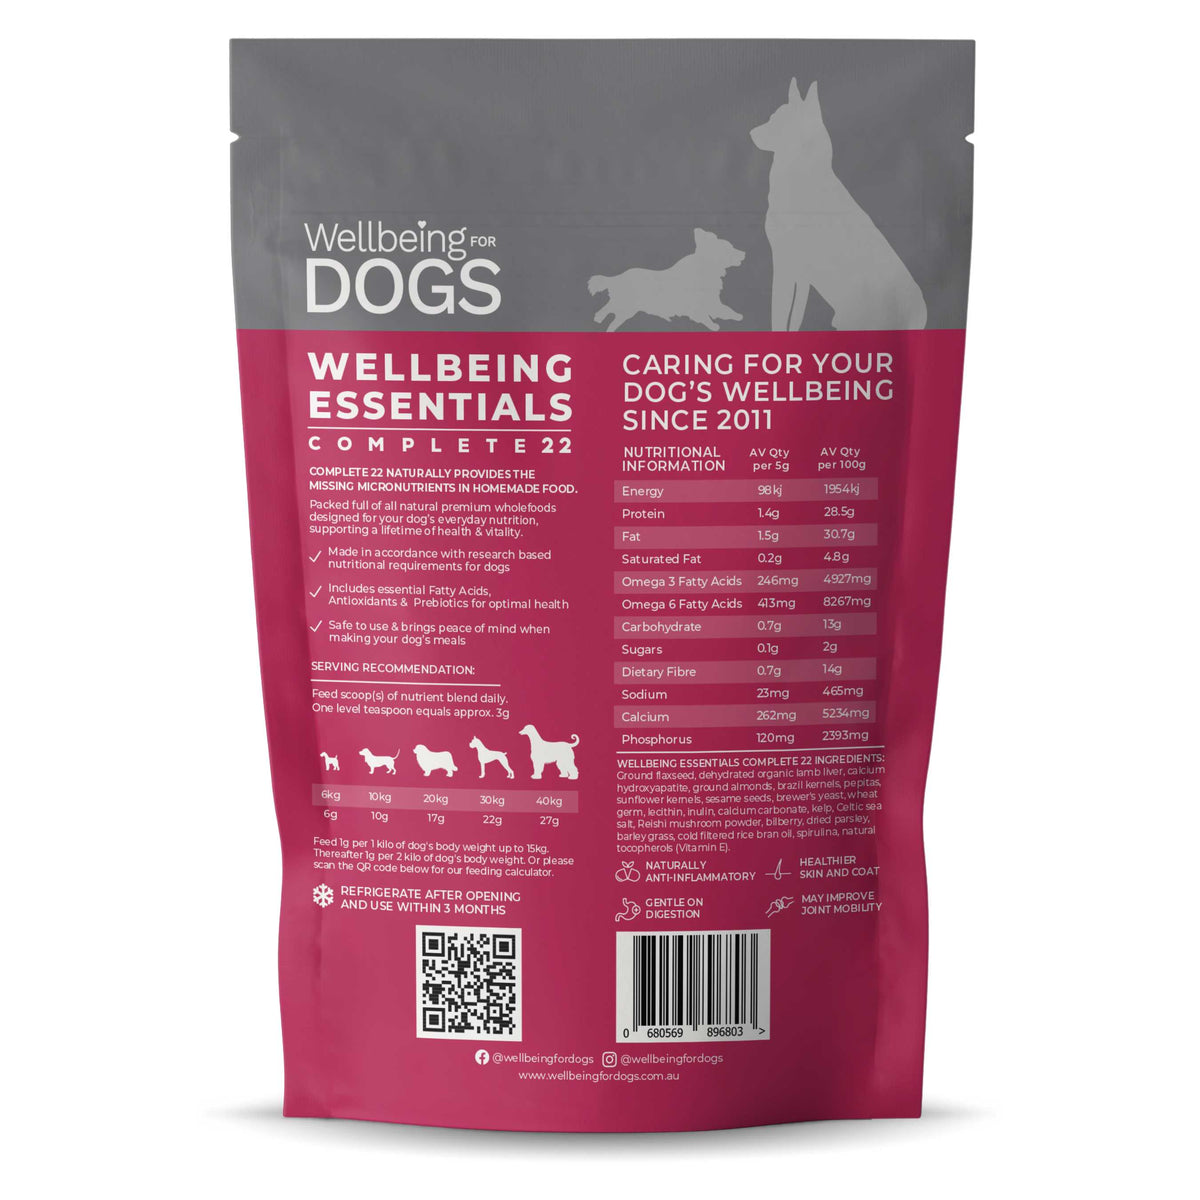 Wellbeing Essentials Complete 22 Wellbeing for Dogs